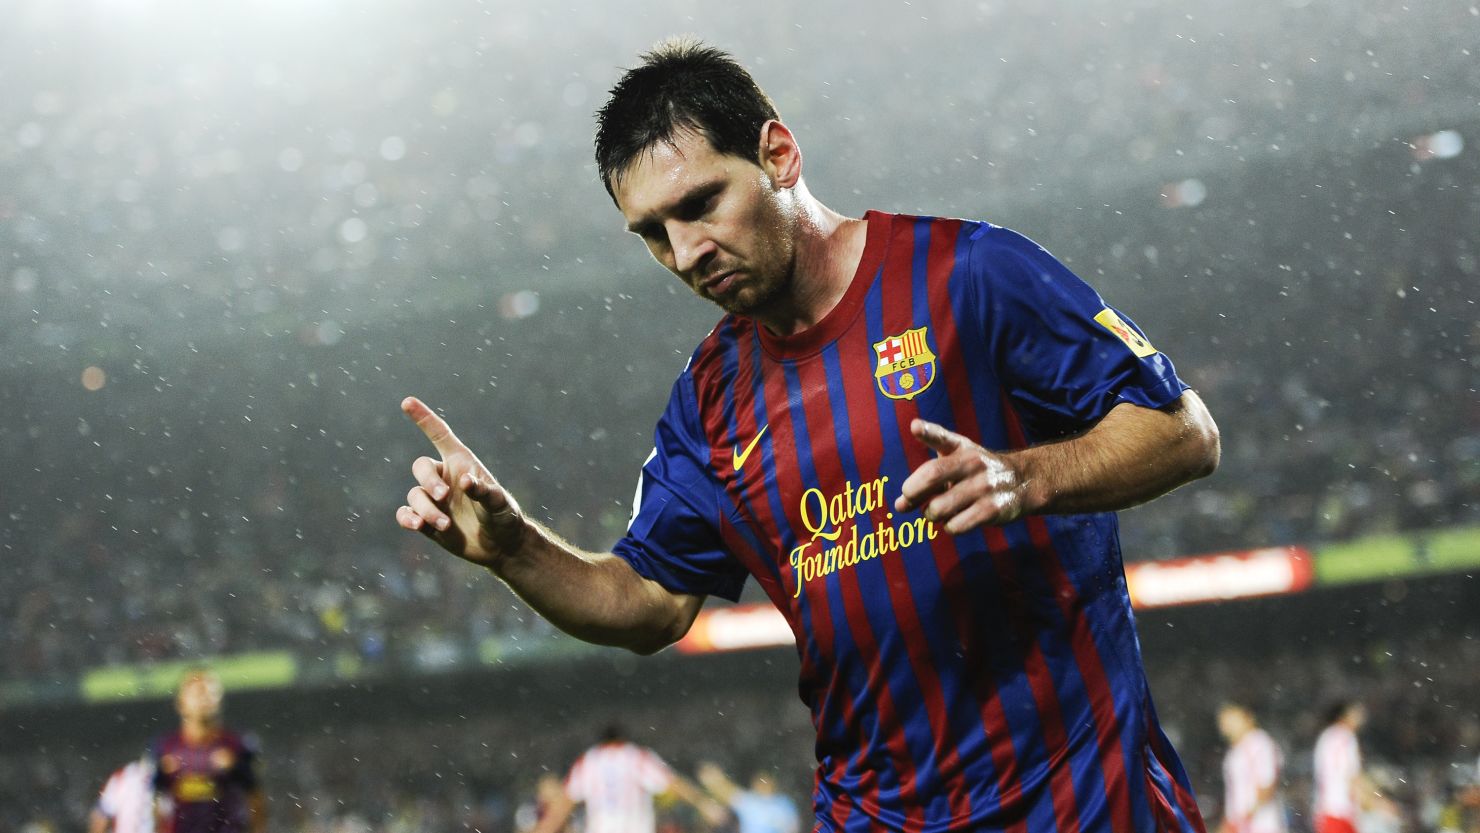 Lionel Messi celebrates after scoring his third goal during Barcaleona's 5-0 win over Atletico Madrid.